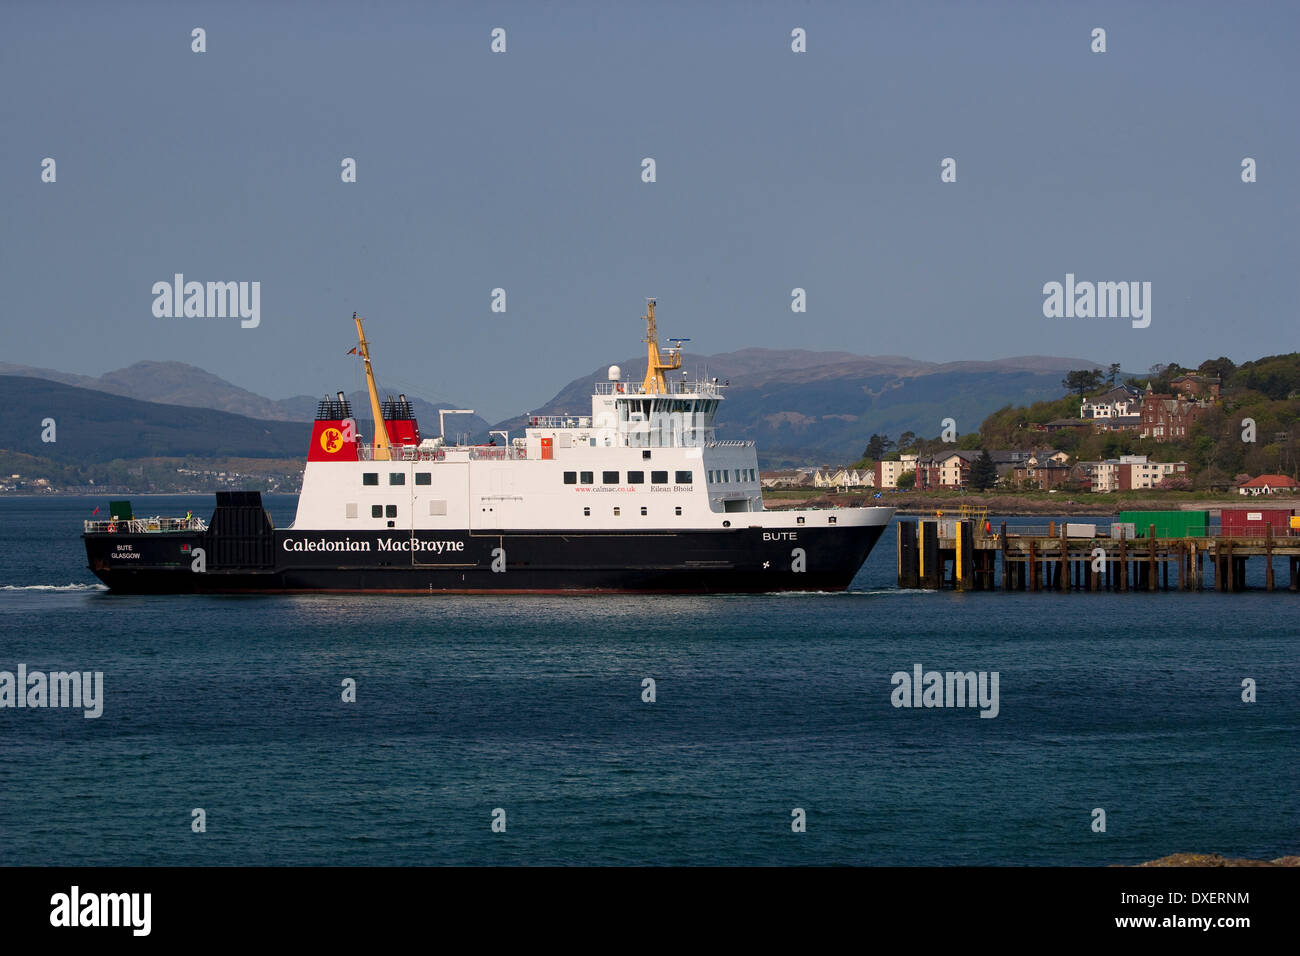 The car ferry MV Bute arriving at Wemyss bay pier from Rothesay,Wemyss bay,renfrewshire,firth of clyde. Stock Photo